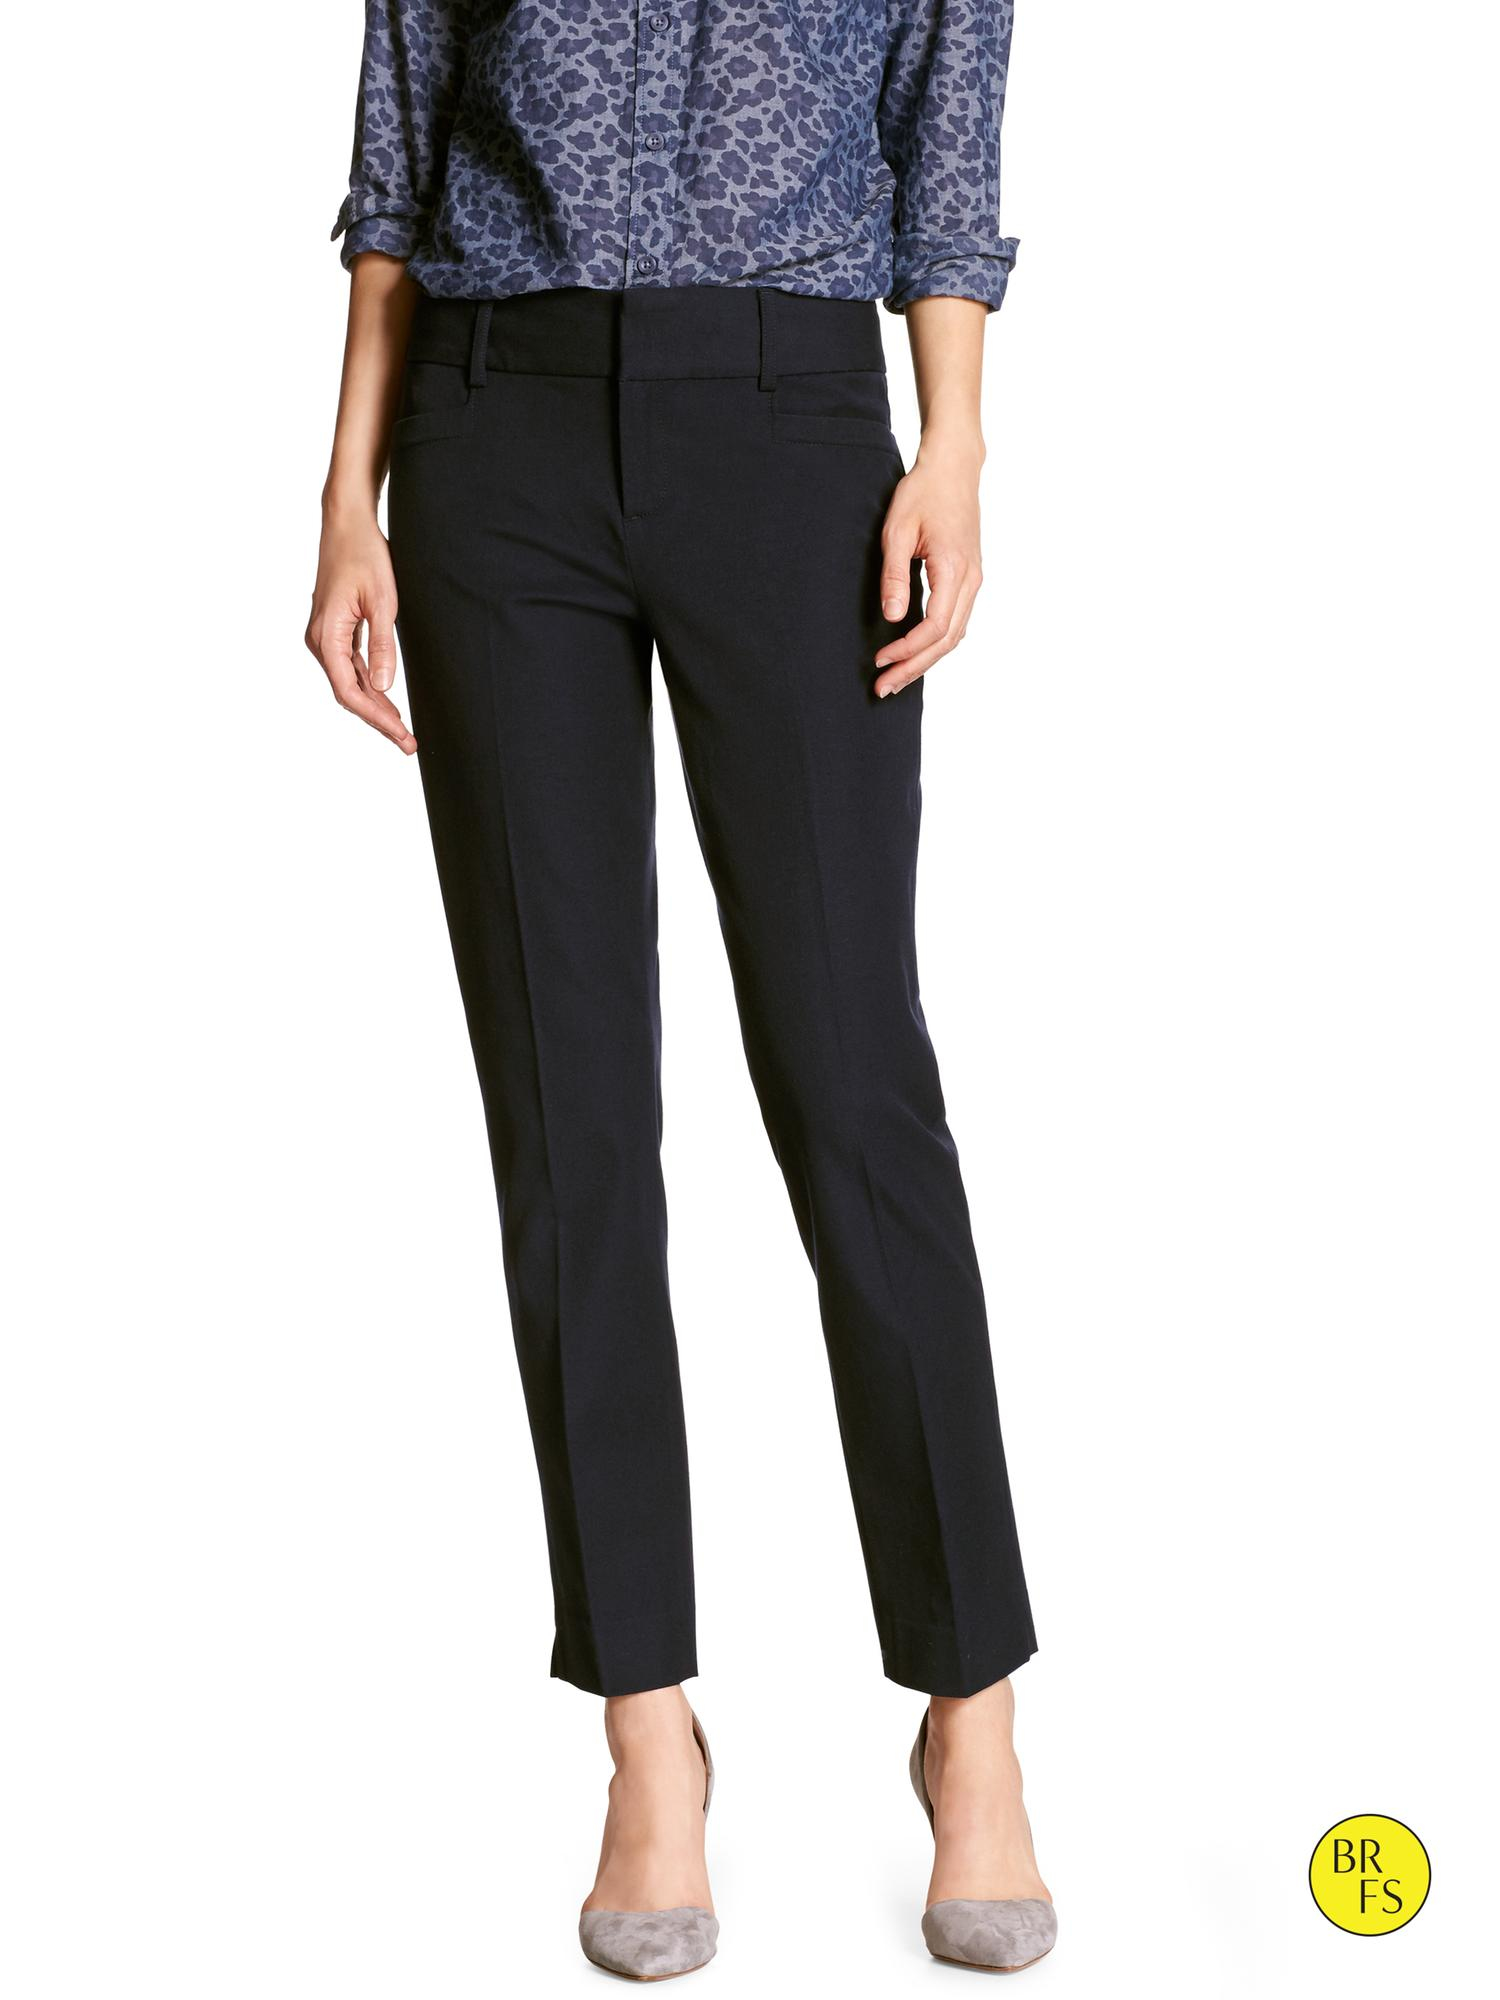 Lyst - Banana Republic Factory Jackson-fit Slim Ankle Pant in Blue